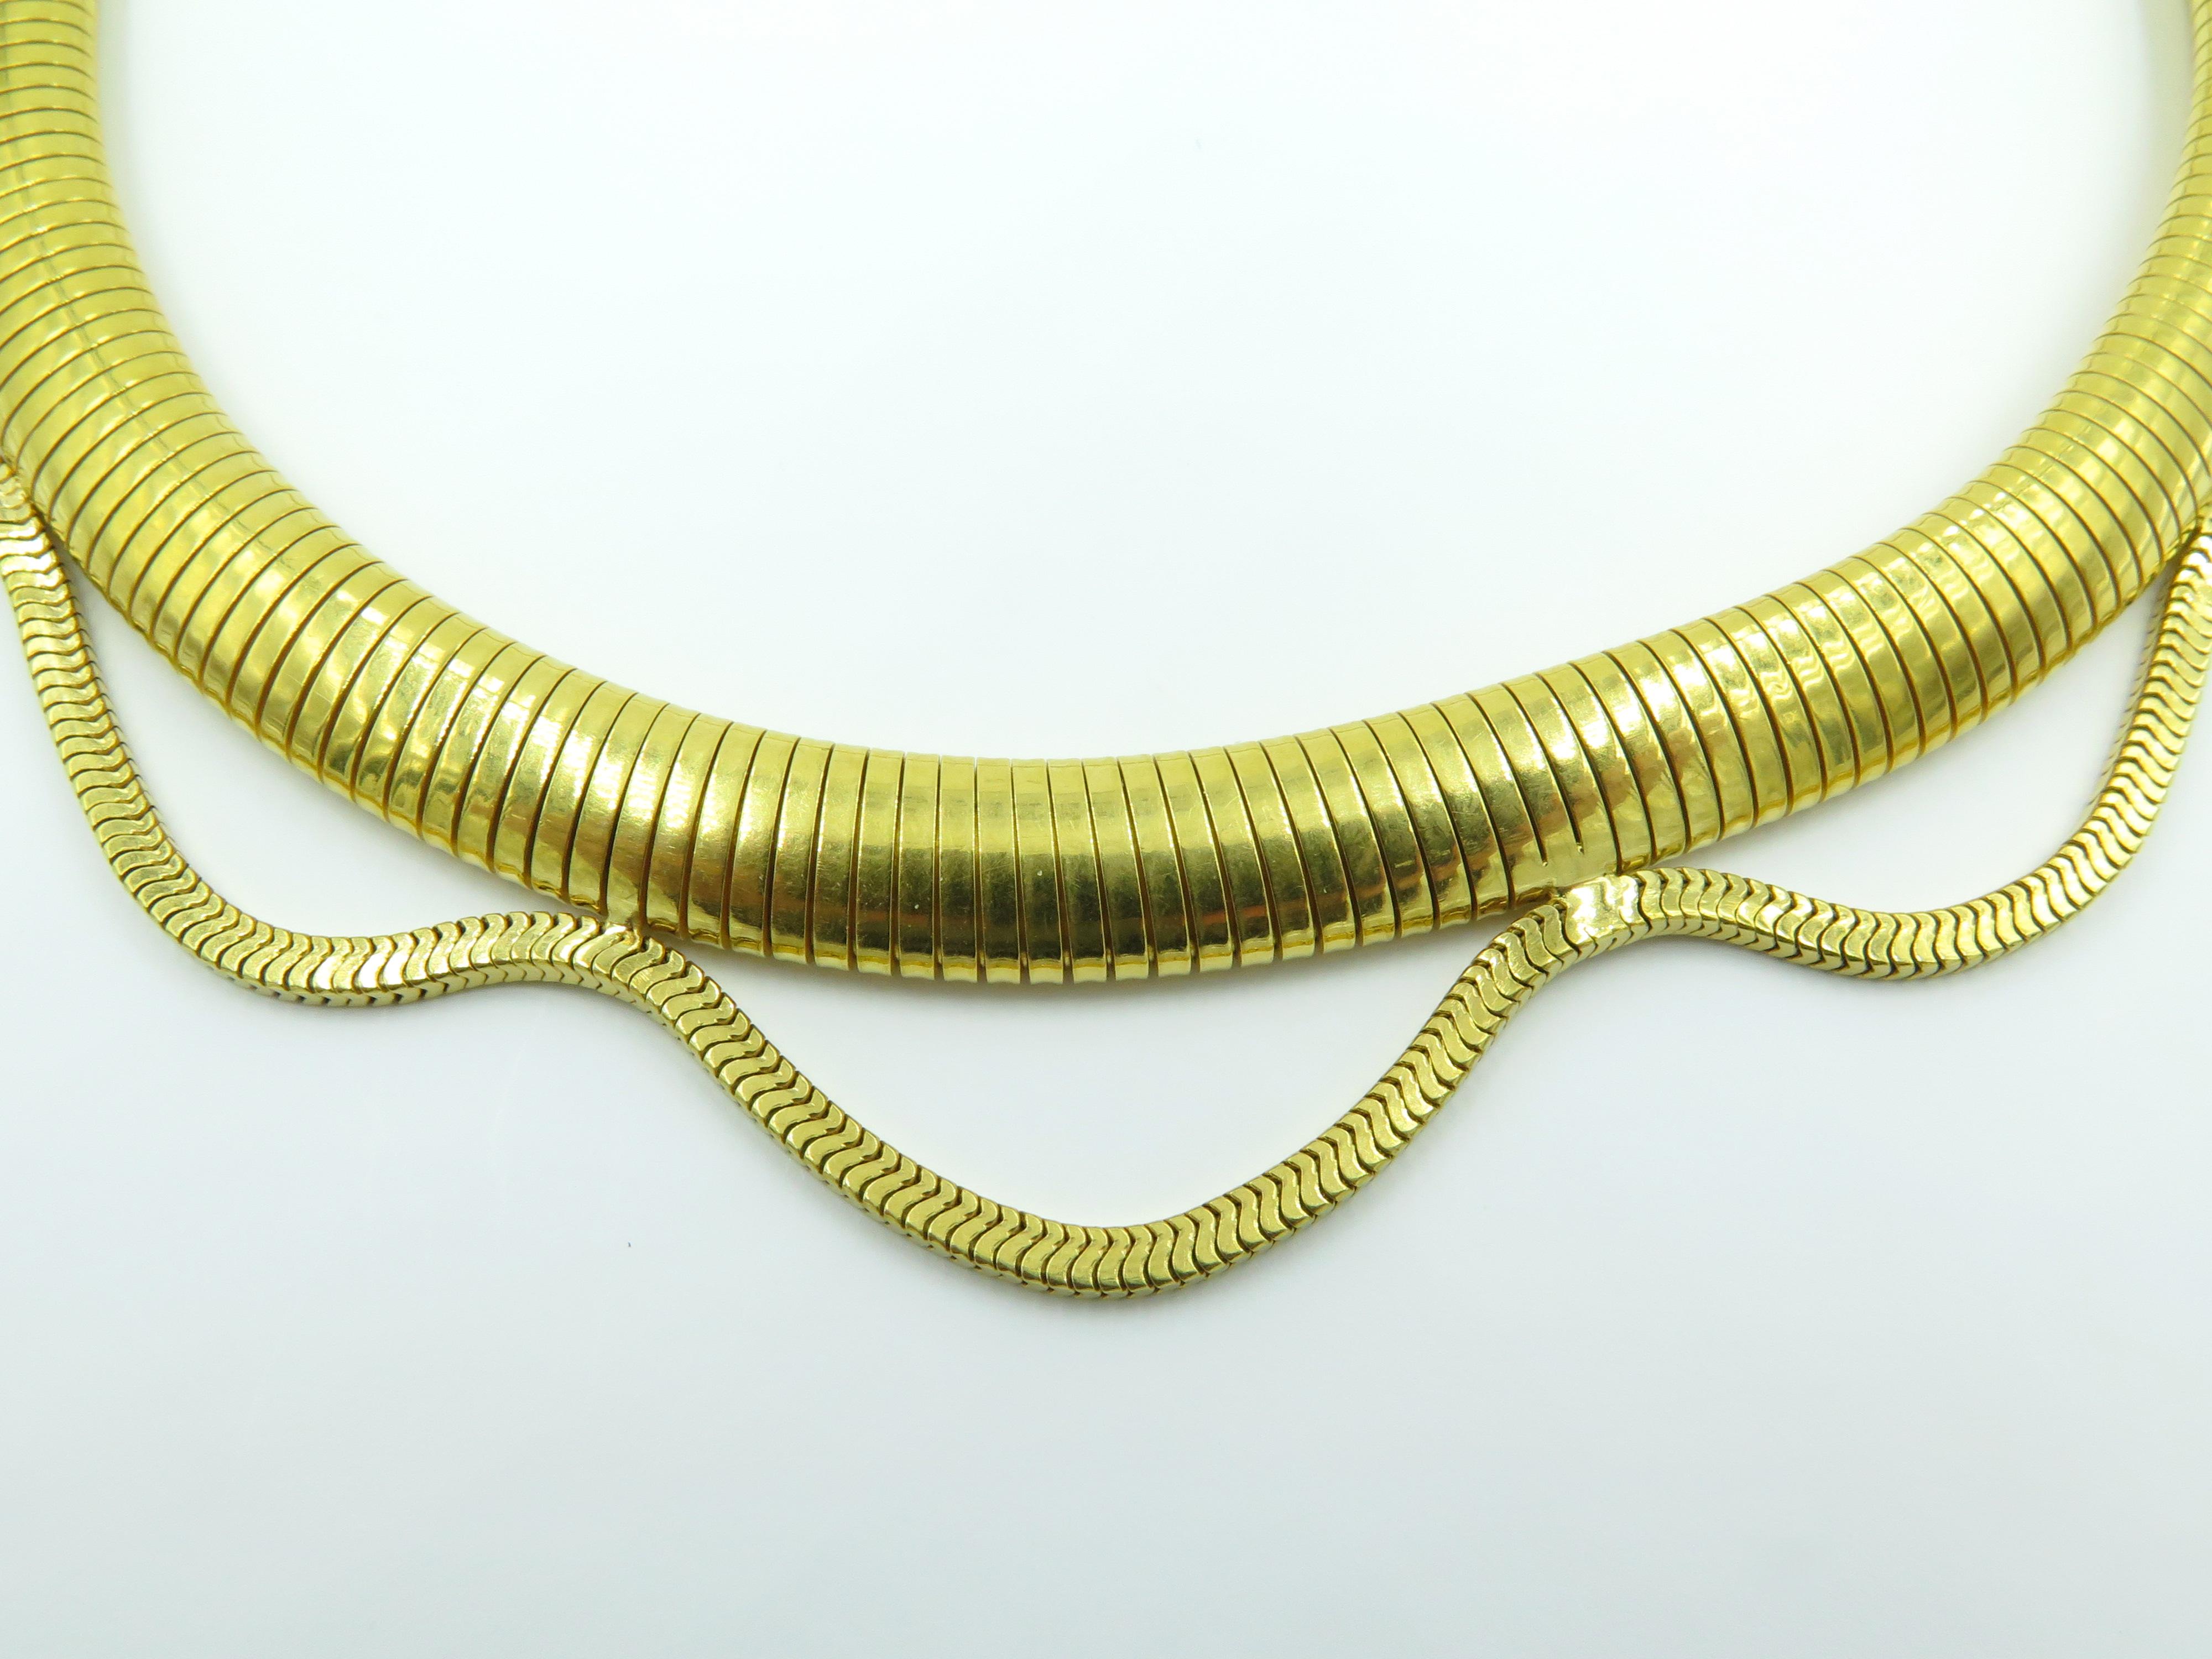 A 14 karat yellow gold necklace. Circa 1940. Designed as a tubogas collar, suspendng an undulating snake chain. Length is approximately 14 inches, gross weight is approximately 83.1 grams.